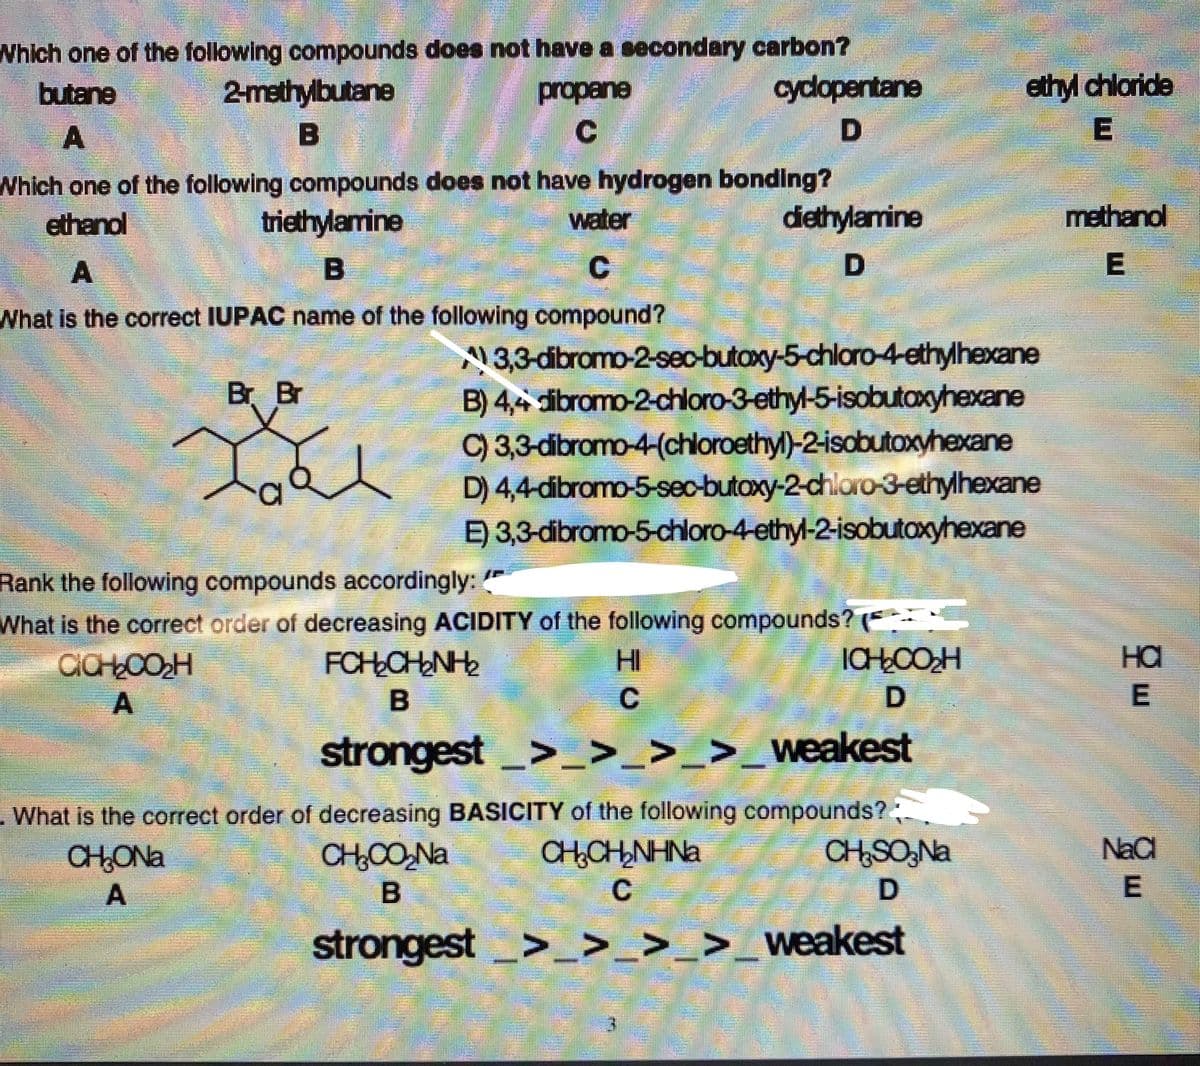 Which one of the following compounds does not have a secondary carbon?
cydopentane
butane
2-mathylbutane
propane
ethyl chloride
C
Which one of the following compounds does not have hydrogen bonding?
triethylamine
ethanol
water
diethylamine
methanol
A
C
What is the correct IUPAC name of the following compound?
3,3-dibromo-2-sec-butoxy-5-chloro-4ethylhexane
B) 4,4 dibromo-2-chloro-3-ethyl-5-isobutaxcyhexane
Br Br
C) 3,3-dibromo-4-(chloroethyl)-2-isobutoxyhexane
D) 4,4-dibromo-5-sec-butoxy-2-chloro-3-ethylhexane
E) 3,3-dibromo-5-chloro-4-ethyl-2-isobutoxyhexane
Rank the following compounds accordingly: "
What is the correct order of decreasing ACIDITY of the following compounds? ( --
FCHCHNH
HI
ICHŁCOH
на
E
strongest>_ >_>_>_weakest
-What is the correct order of decreasing BASICITY of the following compounds?;
CHSO,Na
NaCl
CH,CH,NHNa
C
CHONA
CH0O,Na
strongest
>_>_>_>_weakest
